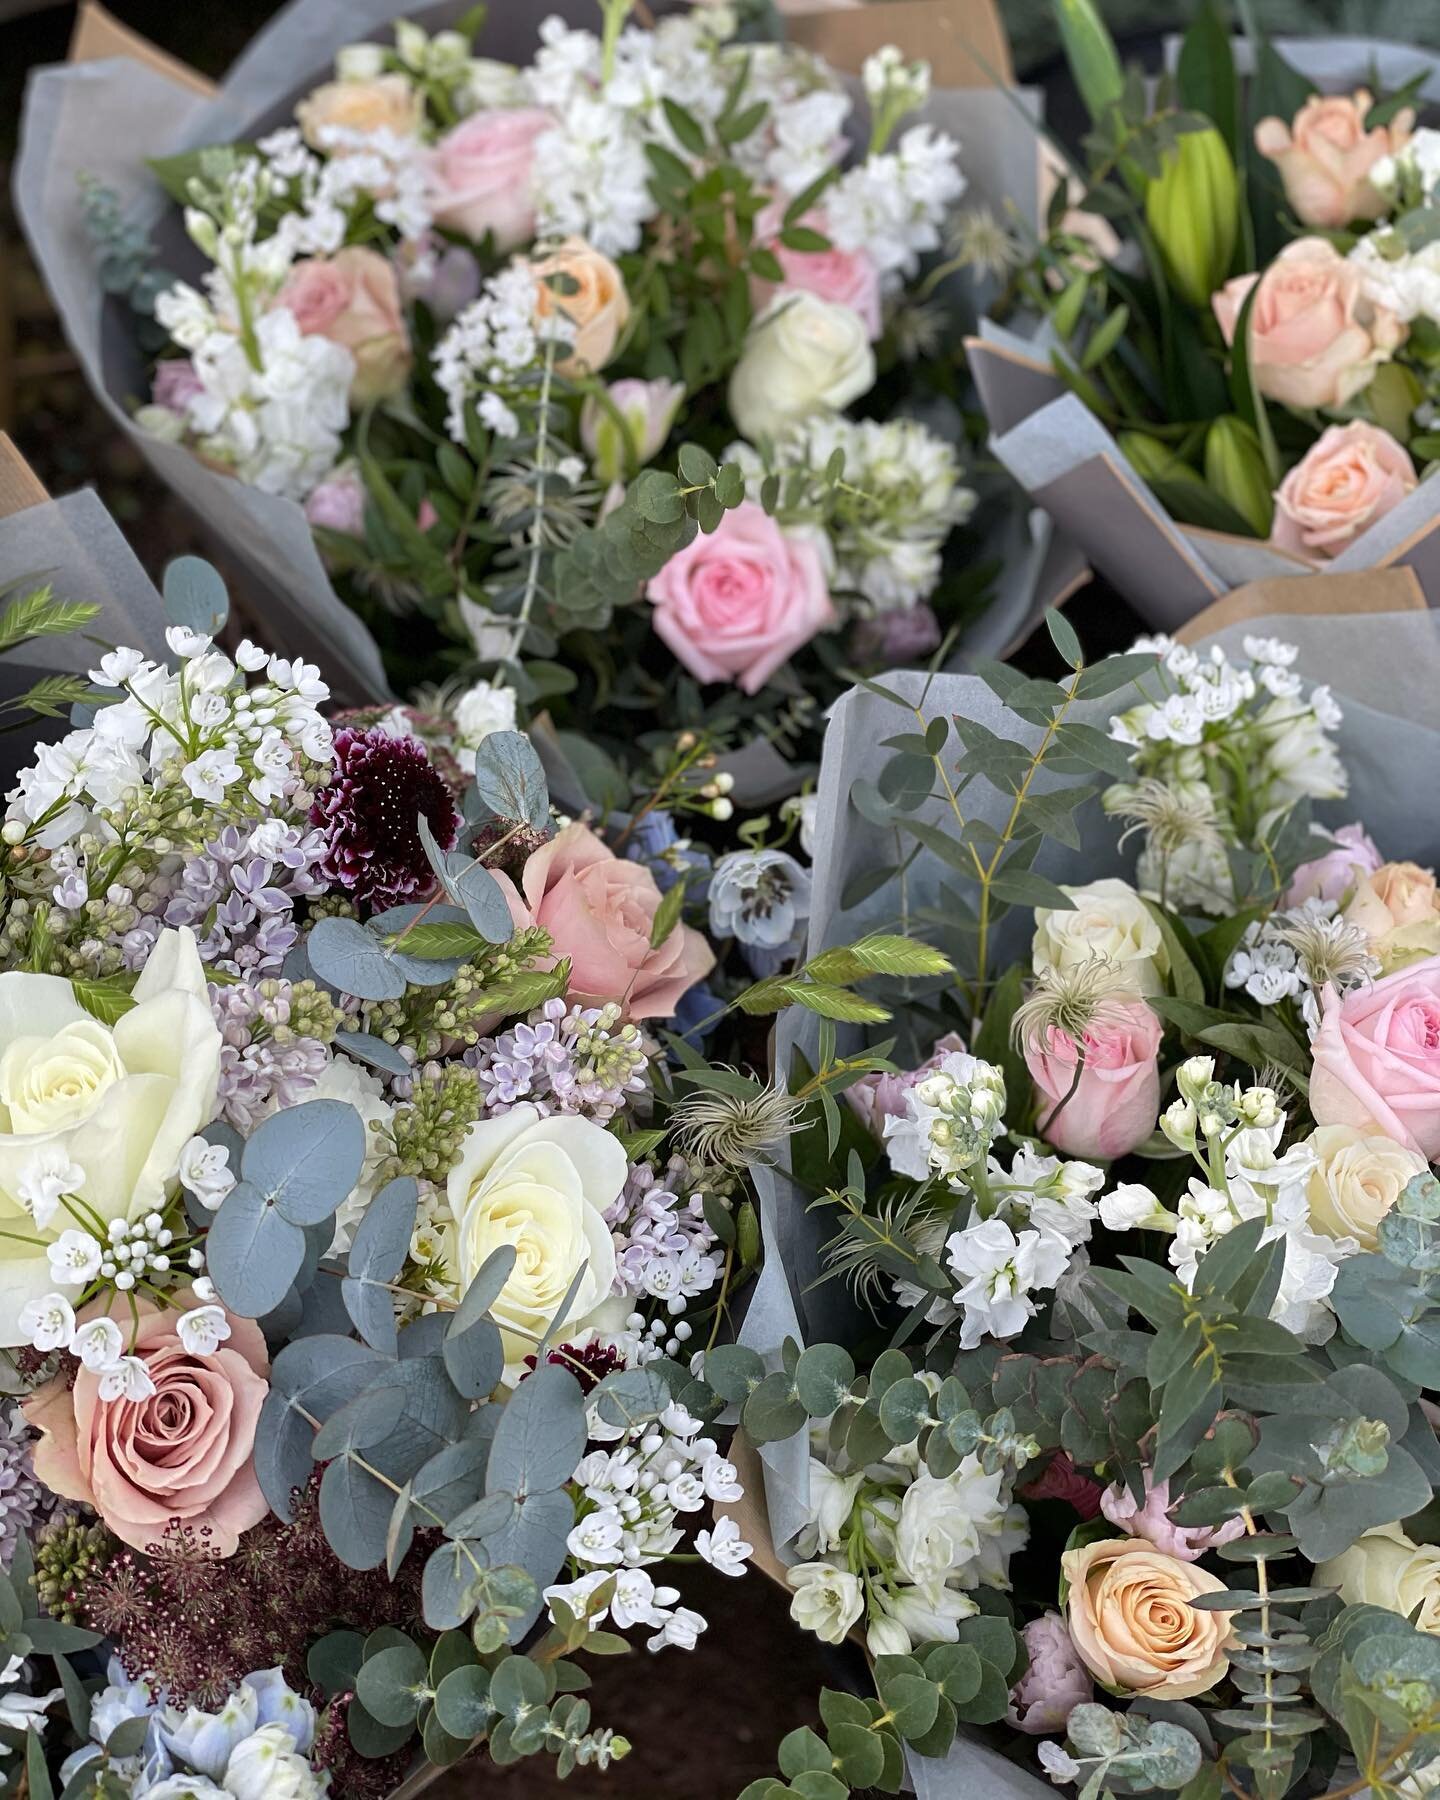 Happy Happy Mothers Day. A huge thank you to each and everyone of you who have supported @bbonnieflowers and ordered and gifted flowers. 🤍
.
A very hard day for so many and my thoughts are with each of you! 😘
.
#mothersday2021 #mothersday #giftingf